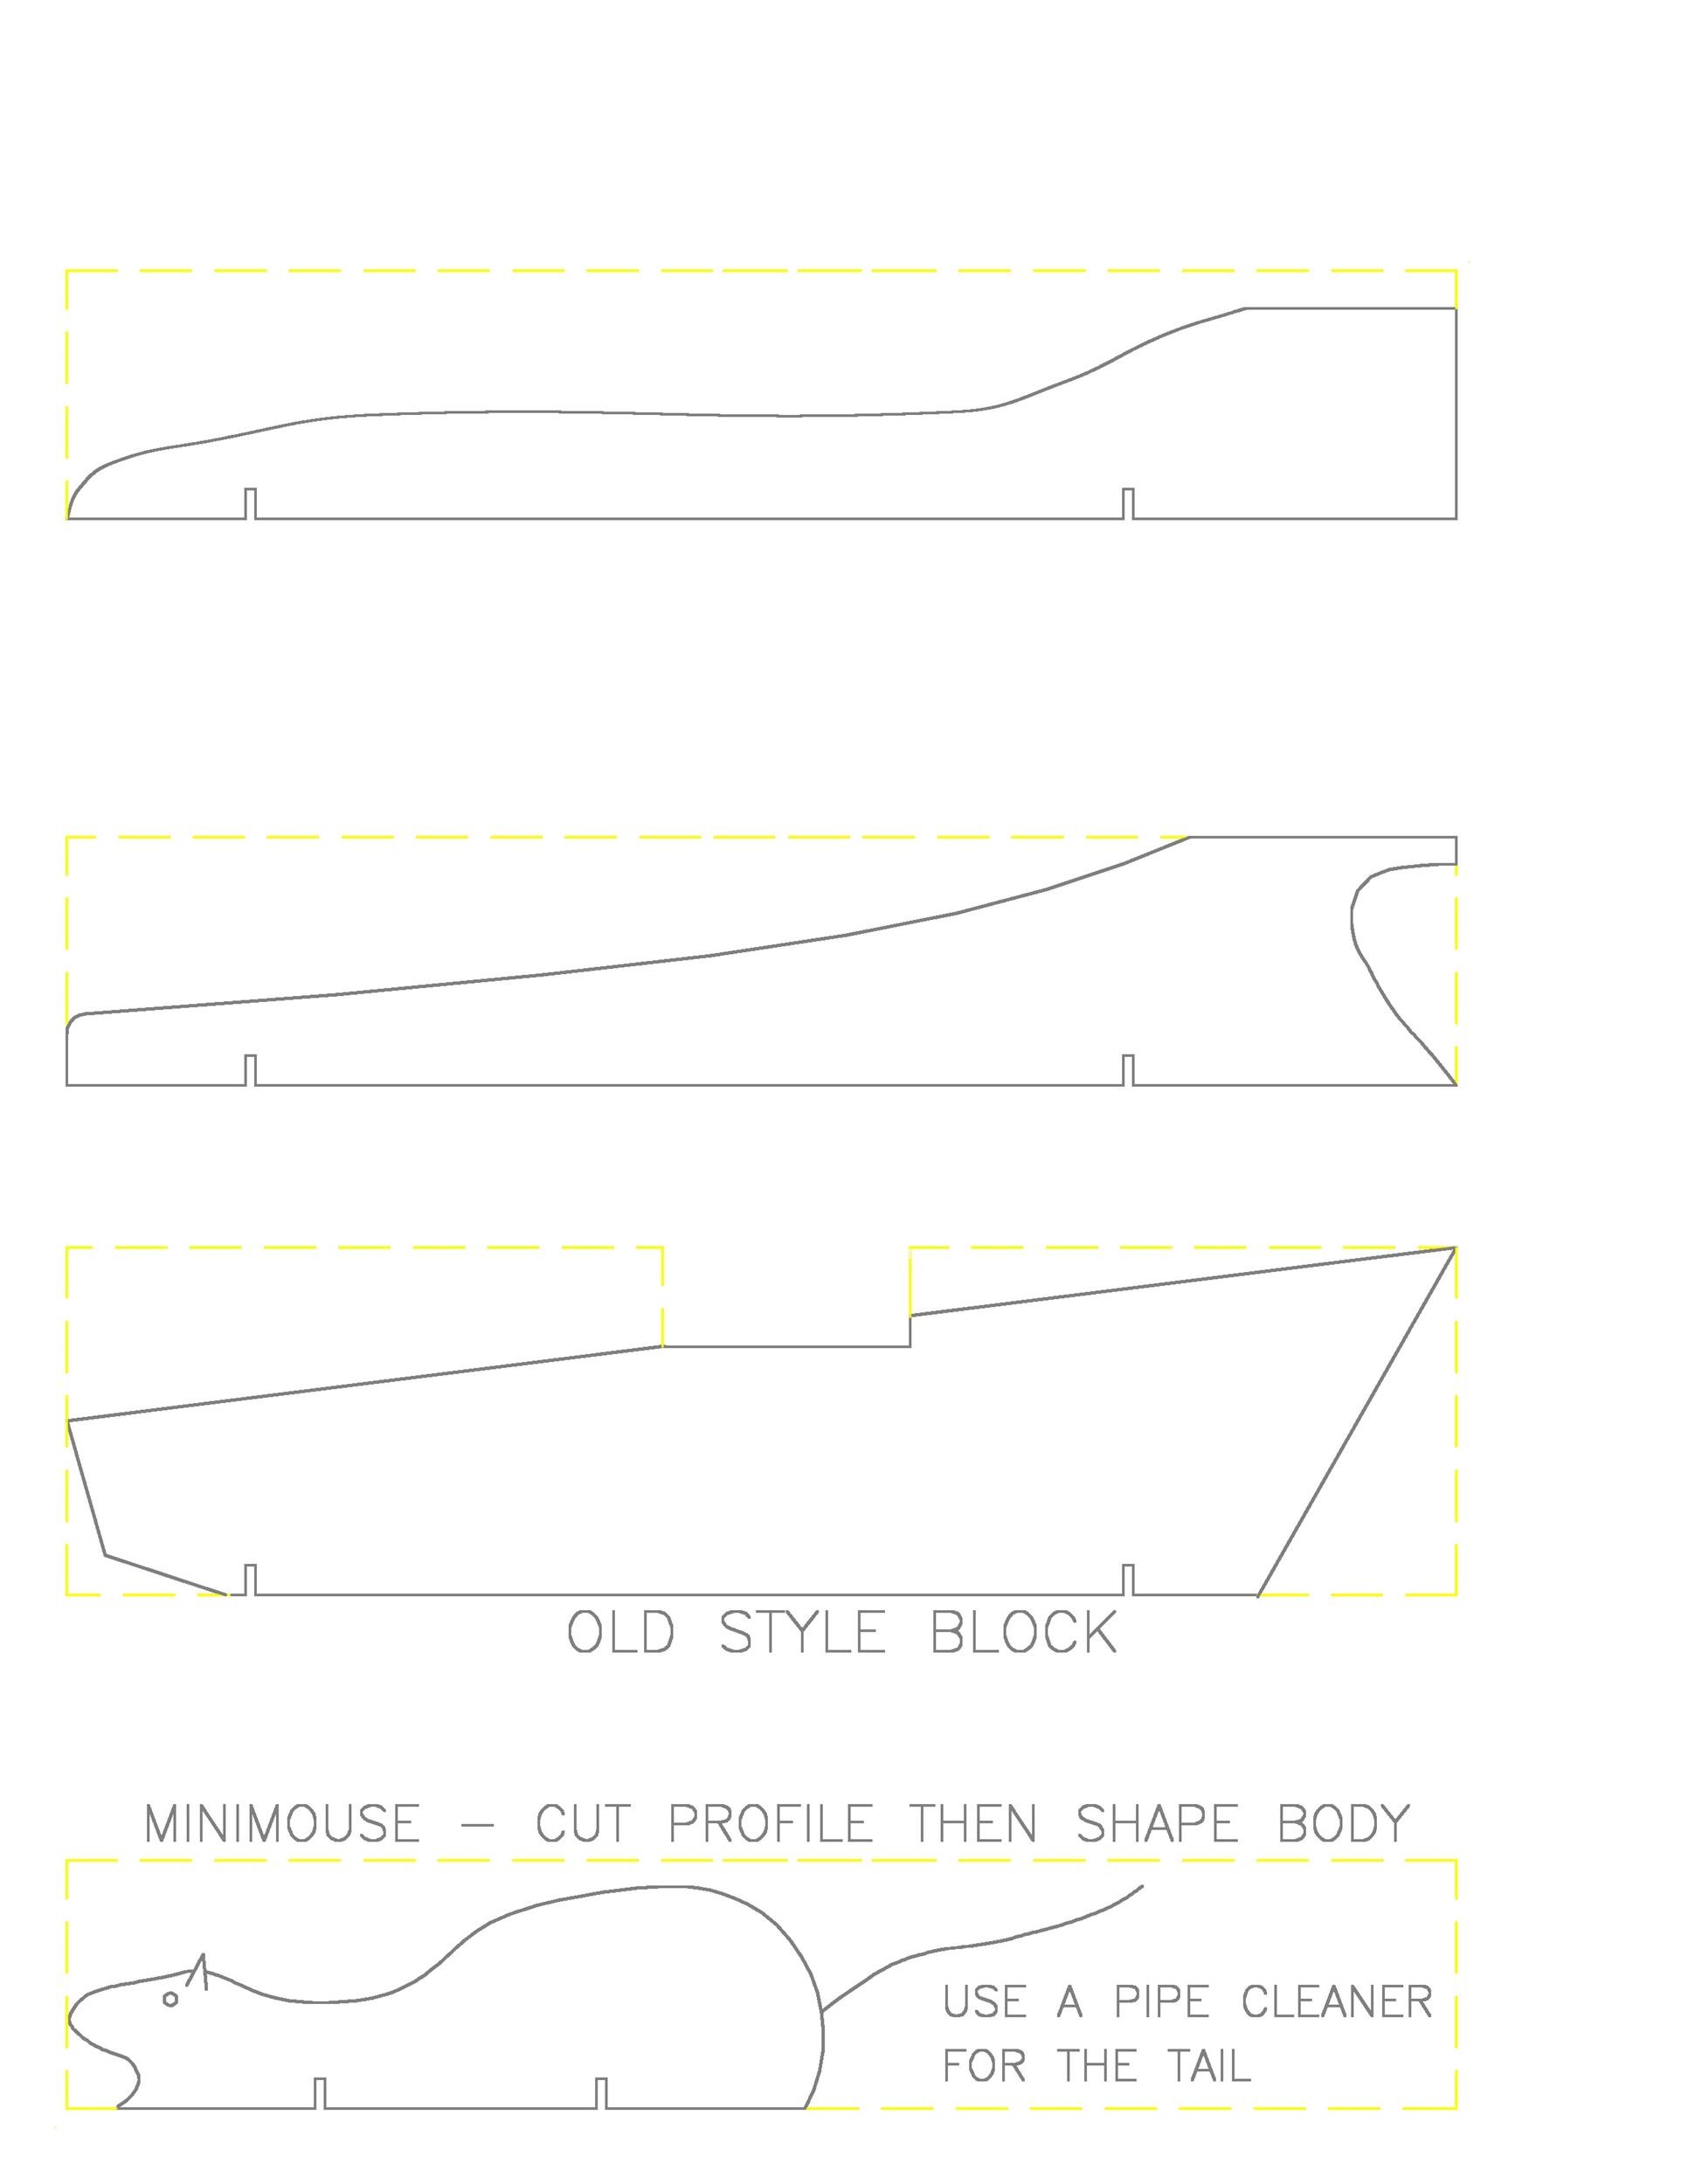 39 Awesome Pinewood Derby Car Designs & Templates ᐅ TemplateLab Image